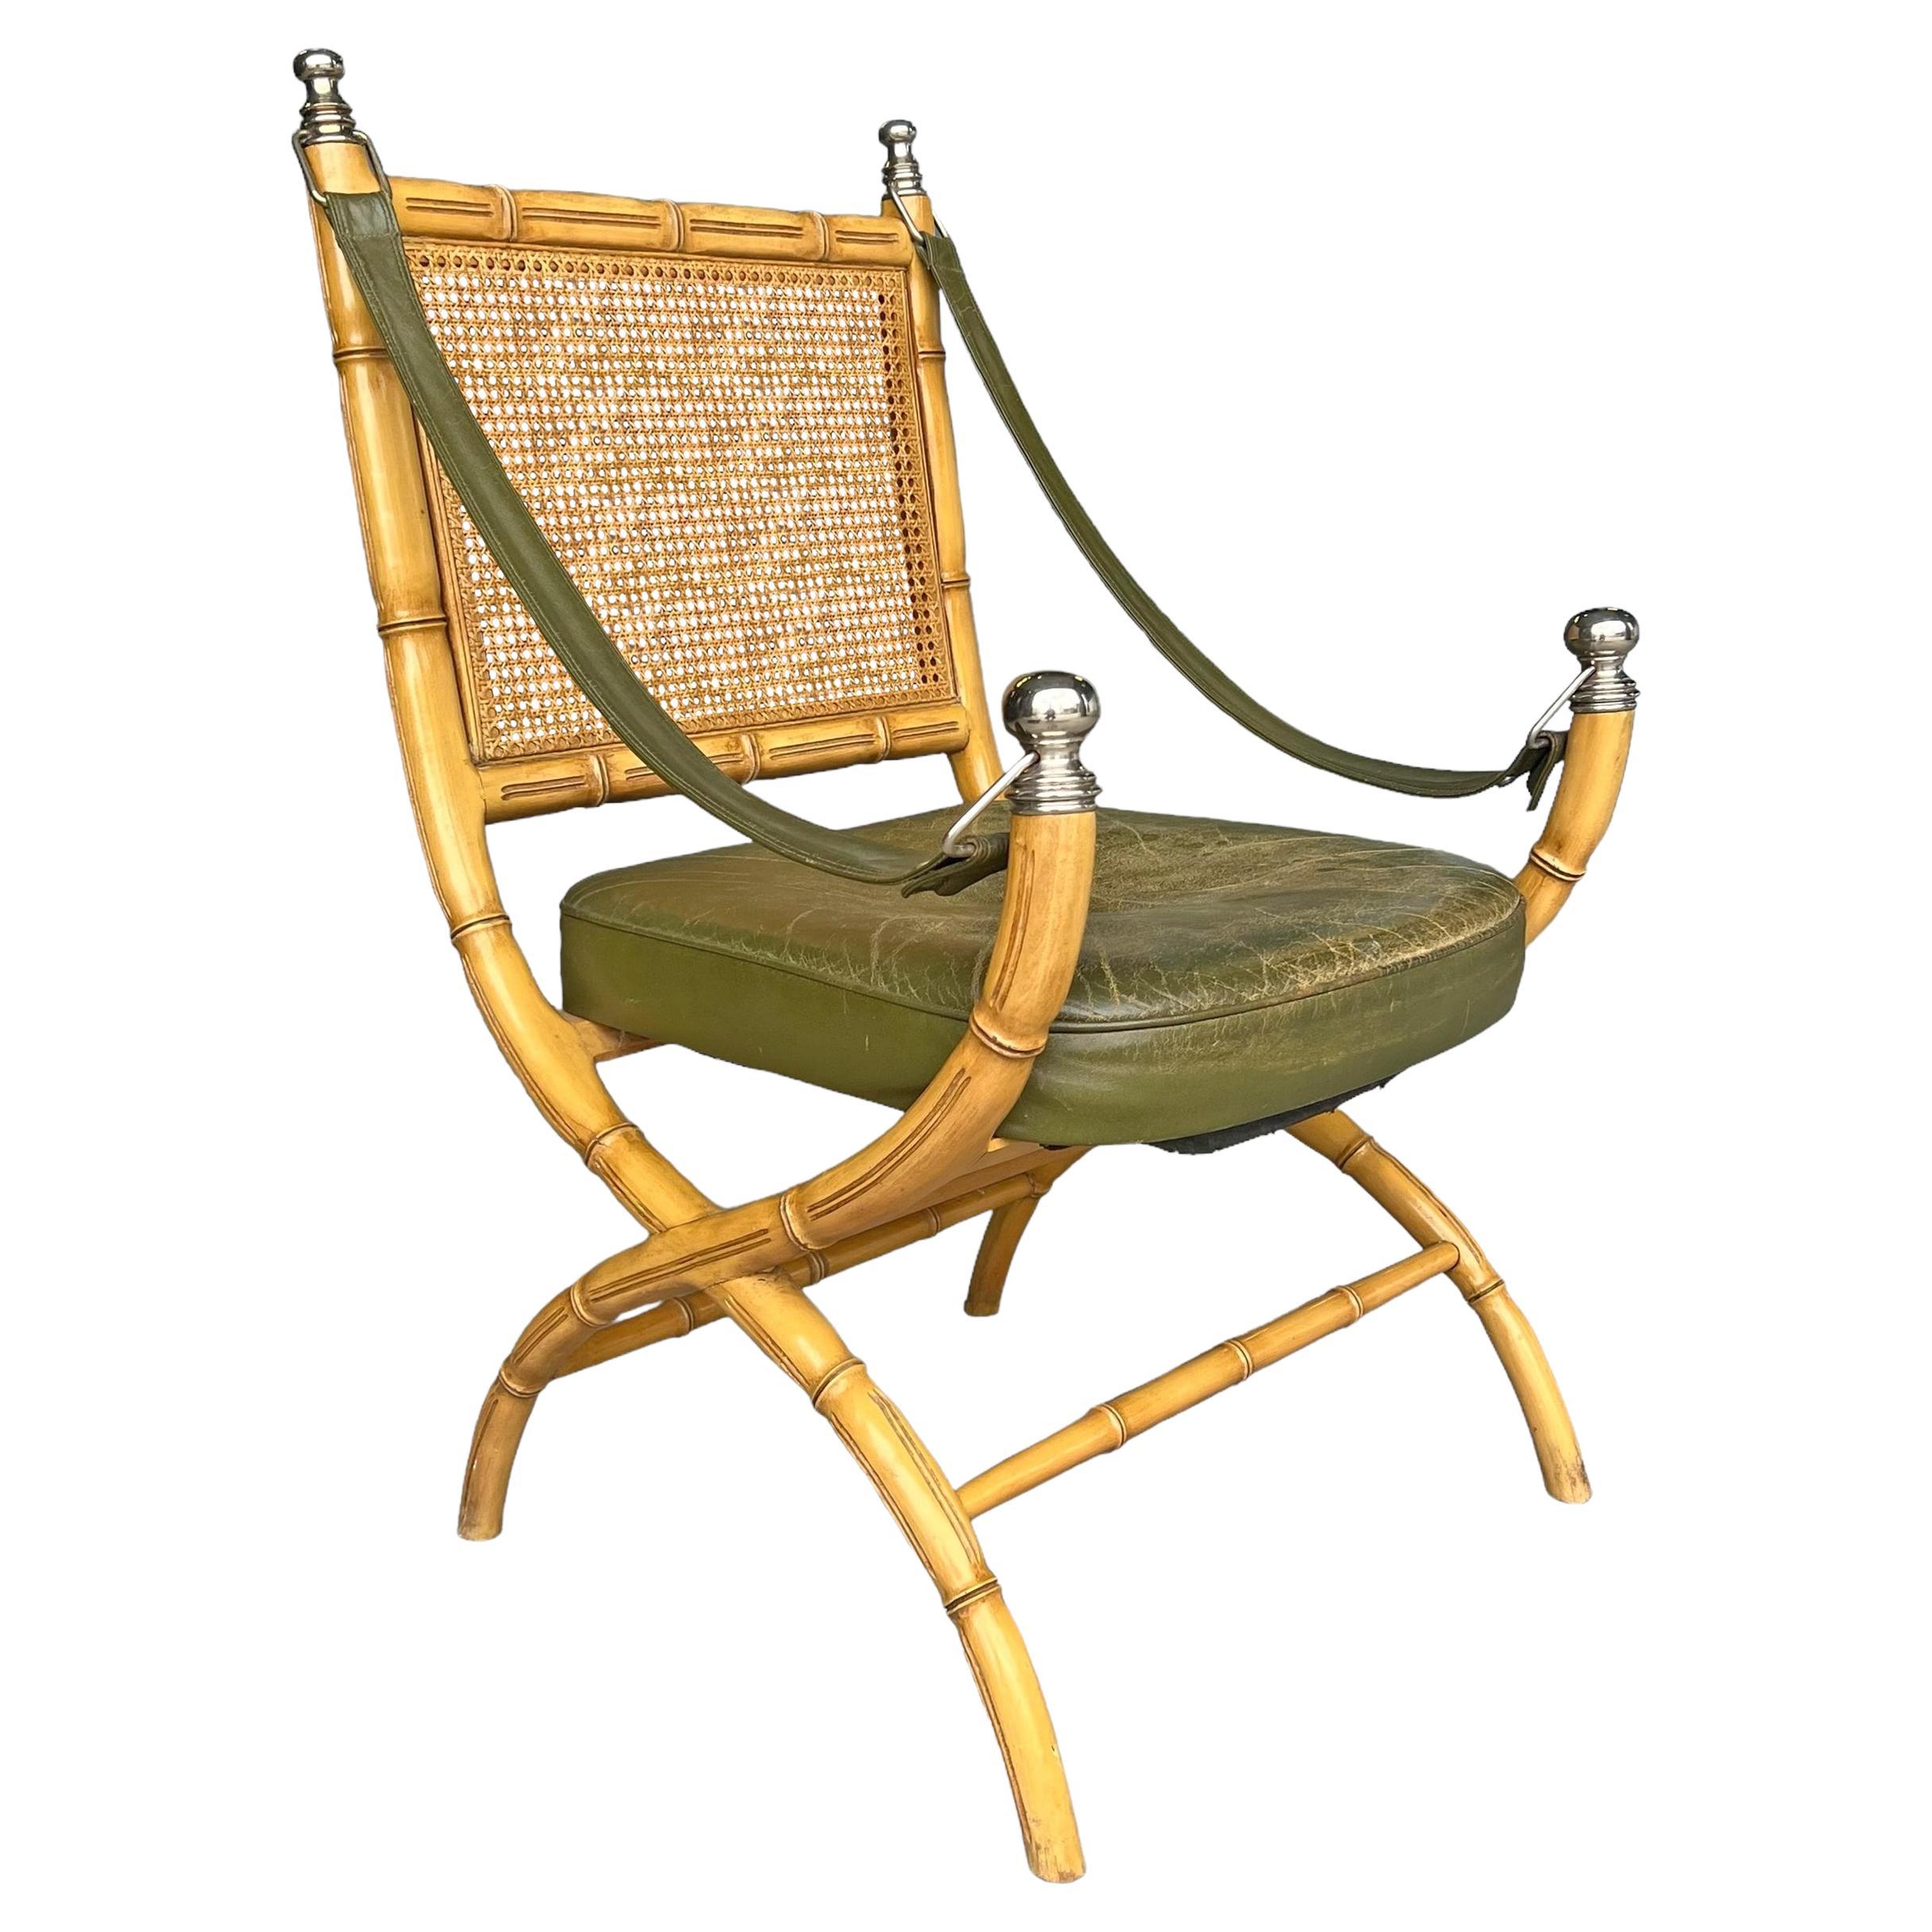 Mid 20th Century American Campaign-Style Chair